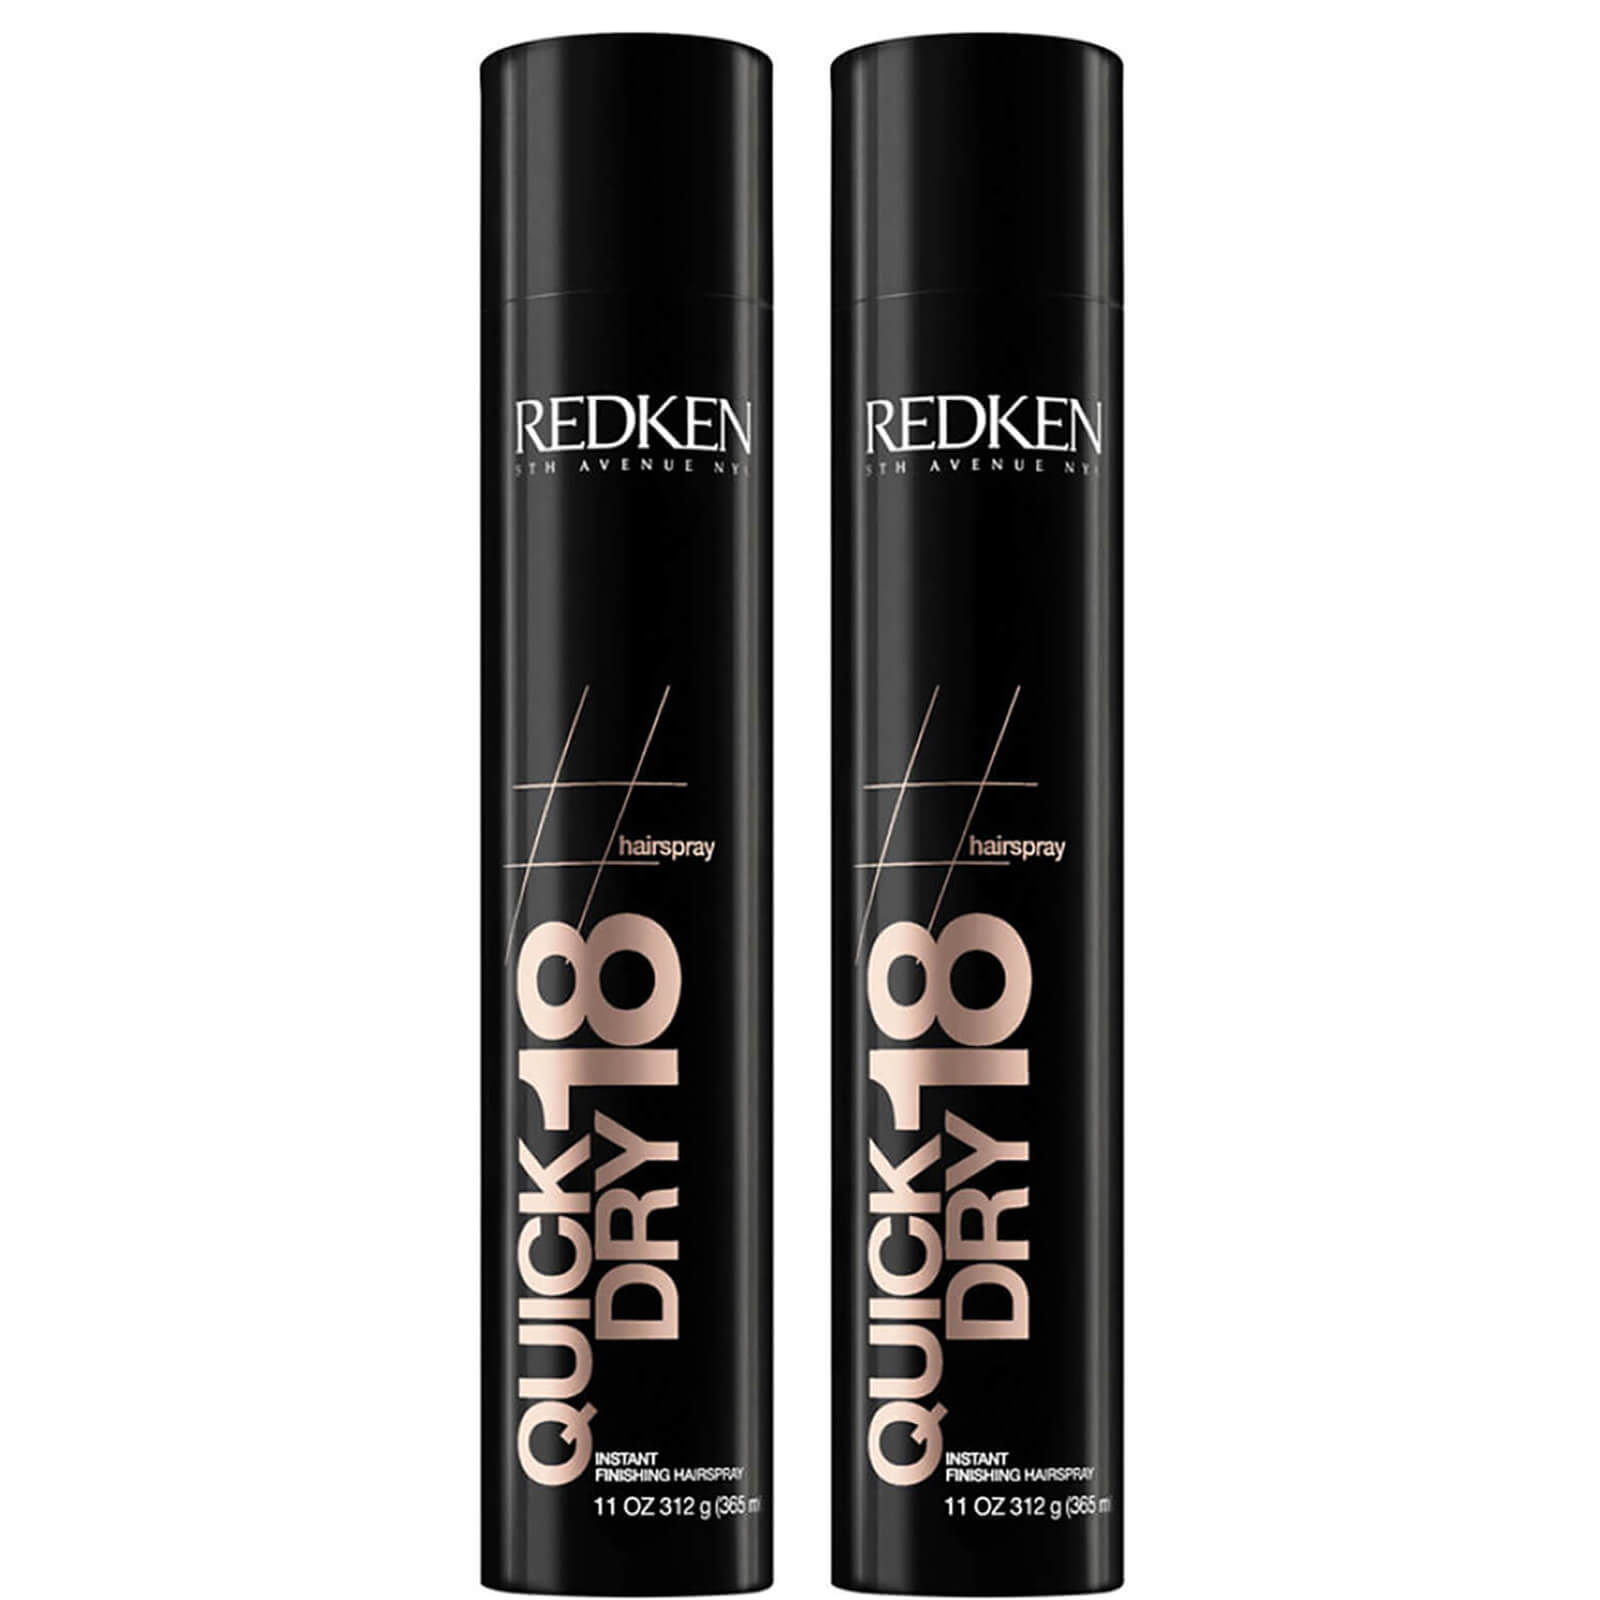 Redken Quick Dry 18 Instant Finishing Hairspray Duo